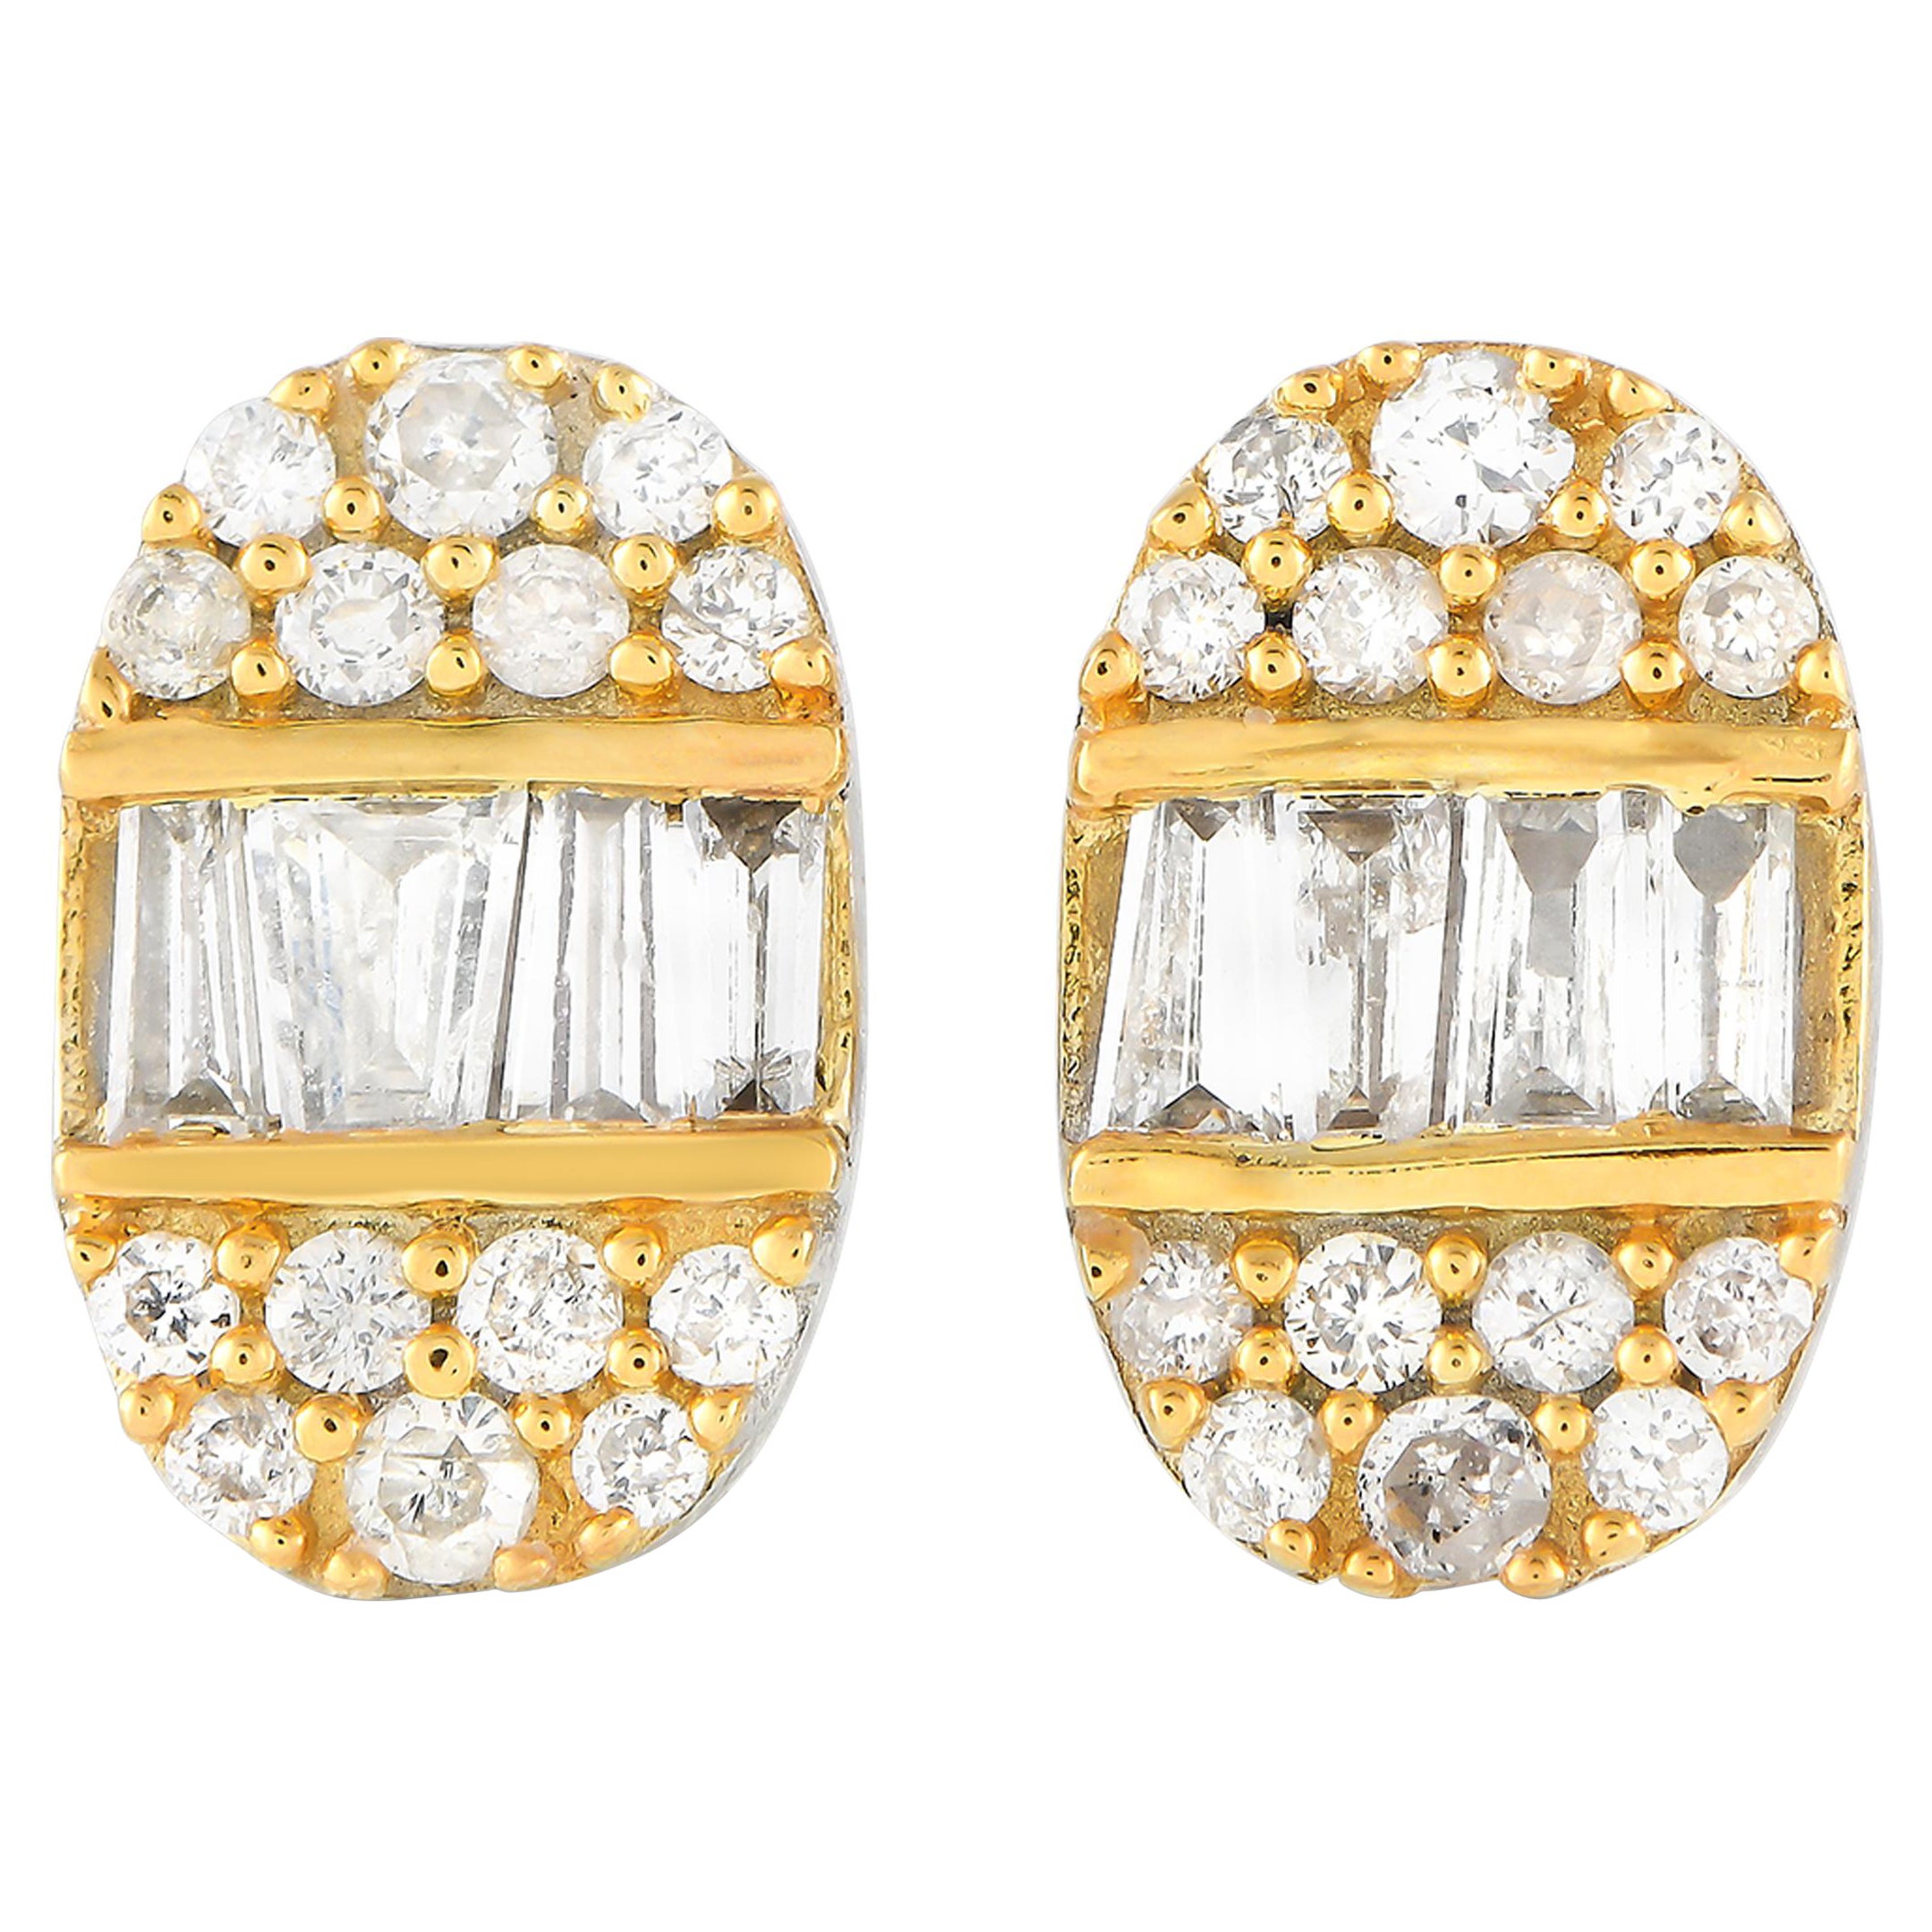 LB Exclusive 14K White and Yellow Gold 0.30ct Diamond Oval Earrings